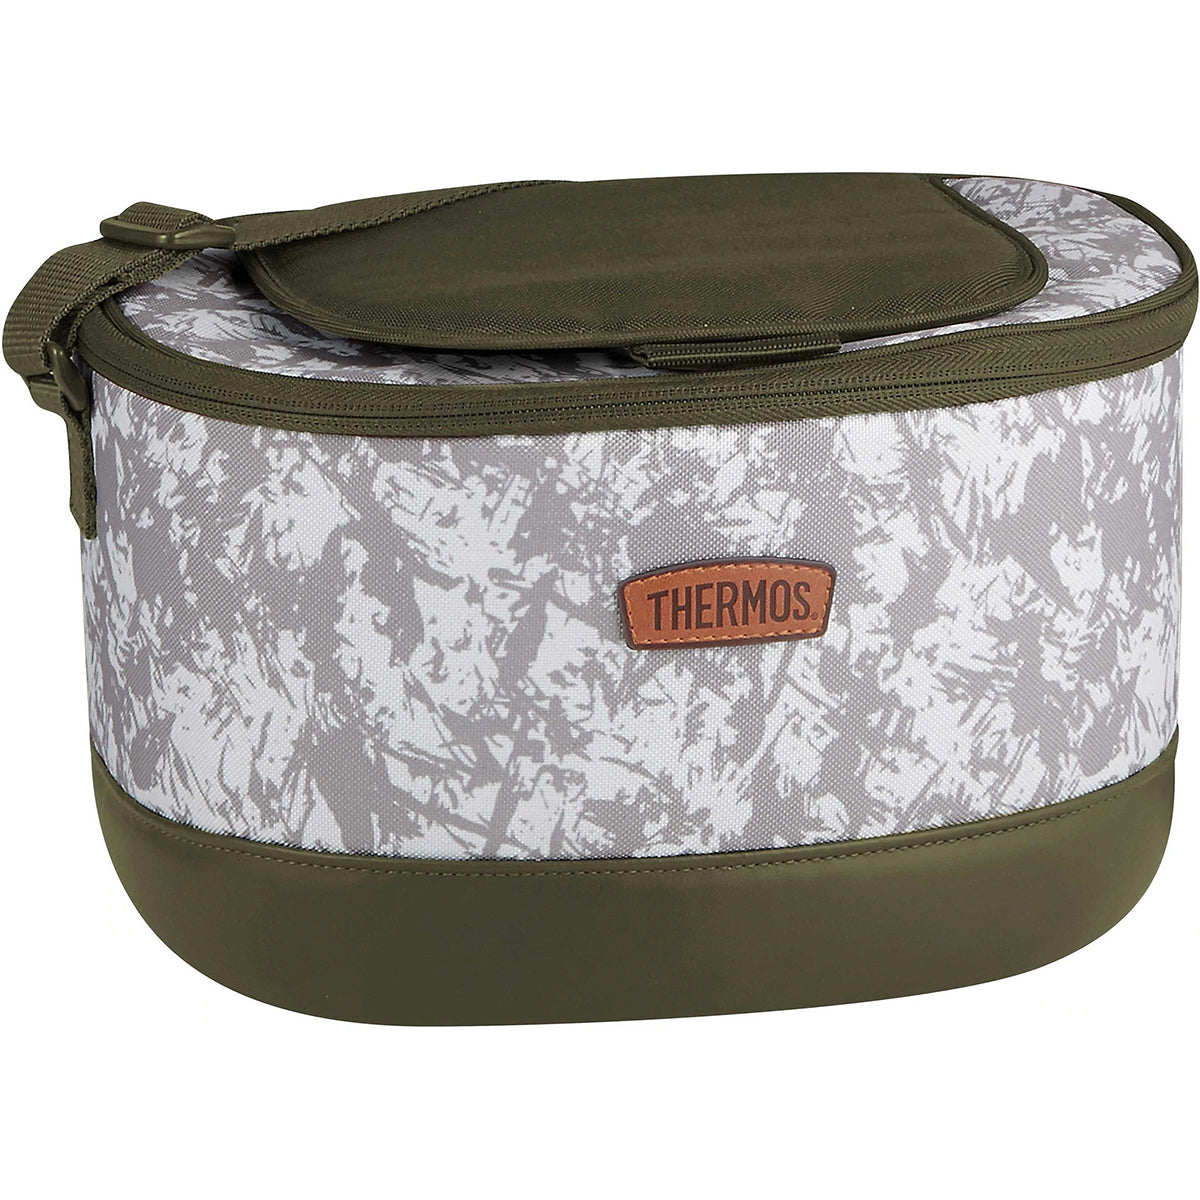 Thermos Premium 6-Can Soft Cooler Thermos